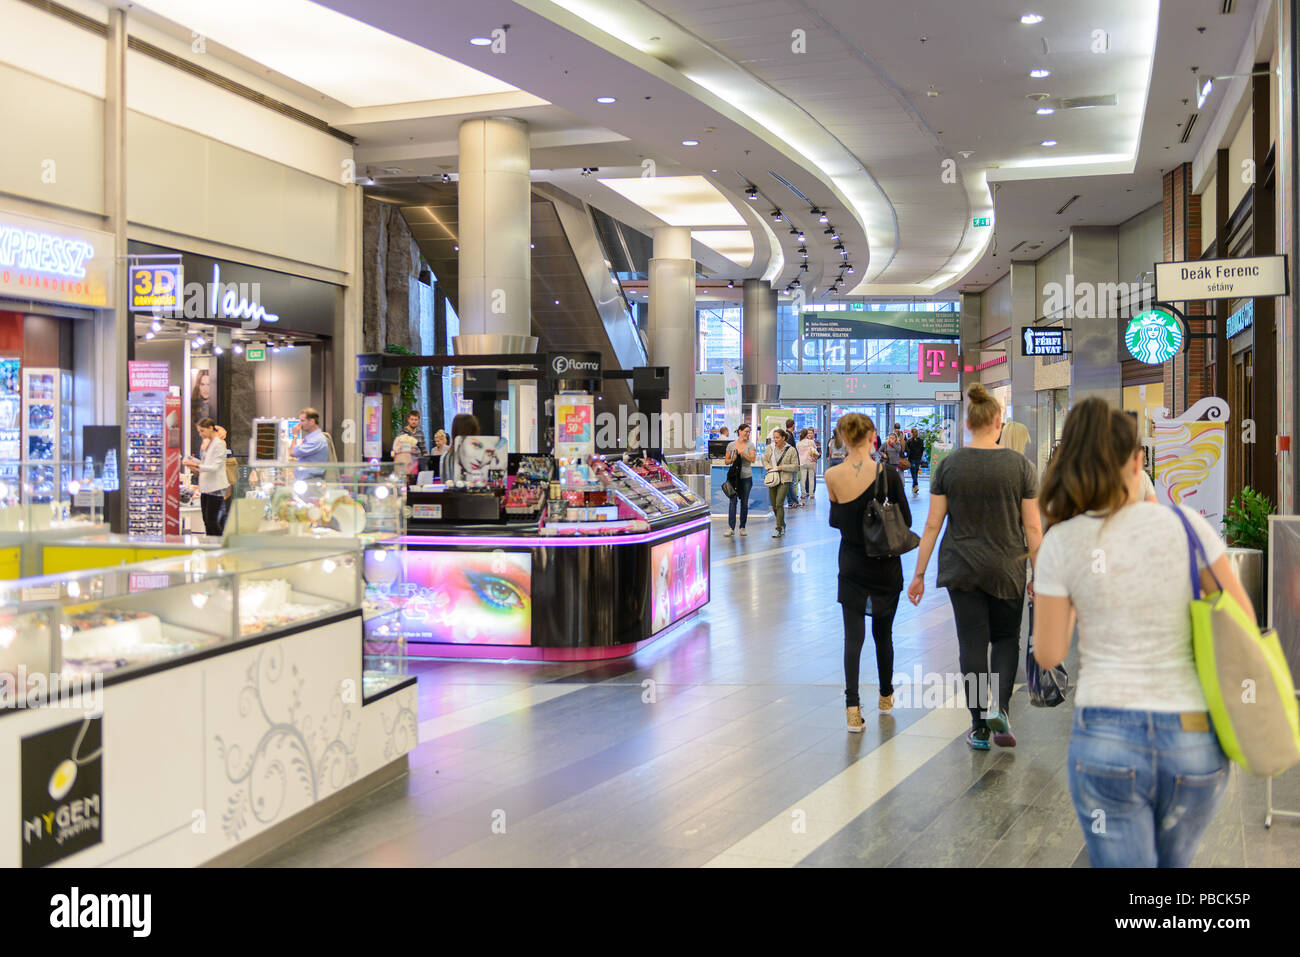 BUDAPEST, HUNGARY - AUG 27, 2014: West End City Center, a shopping centre in Budapest, Hungary. it is the former largest mall in Central Europe and it Stock Photo